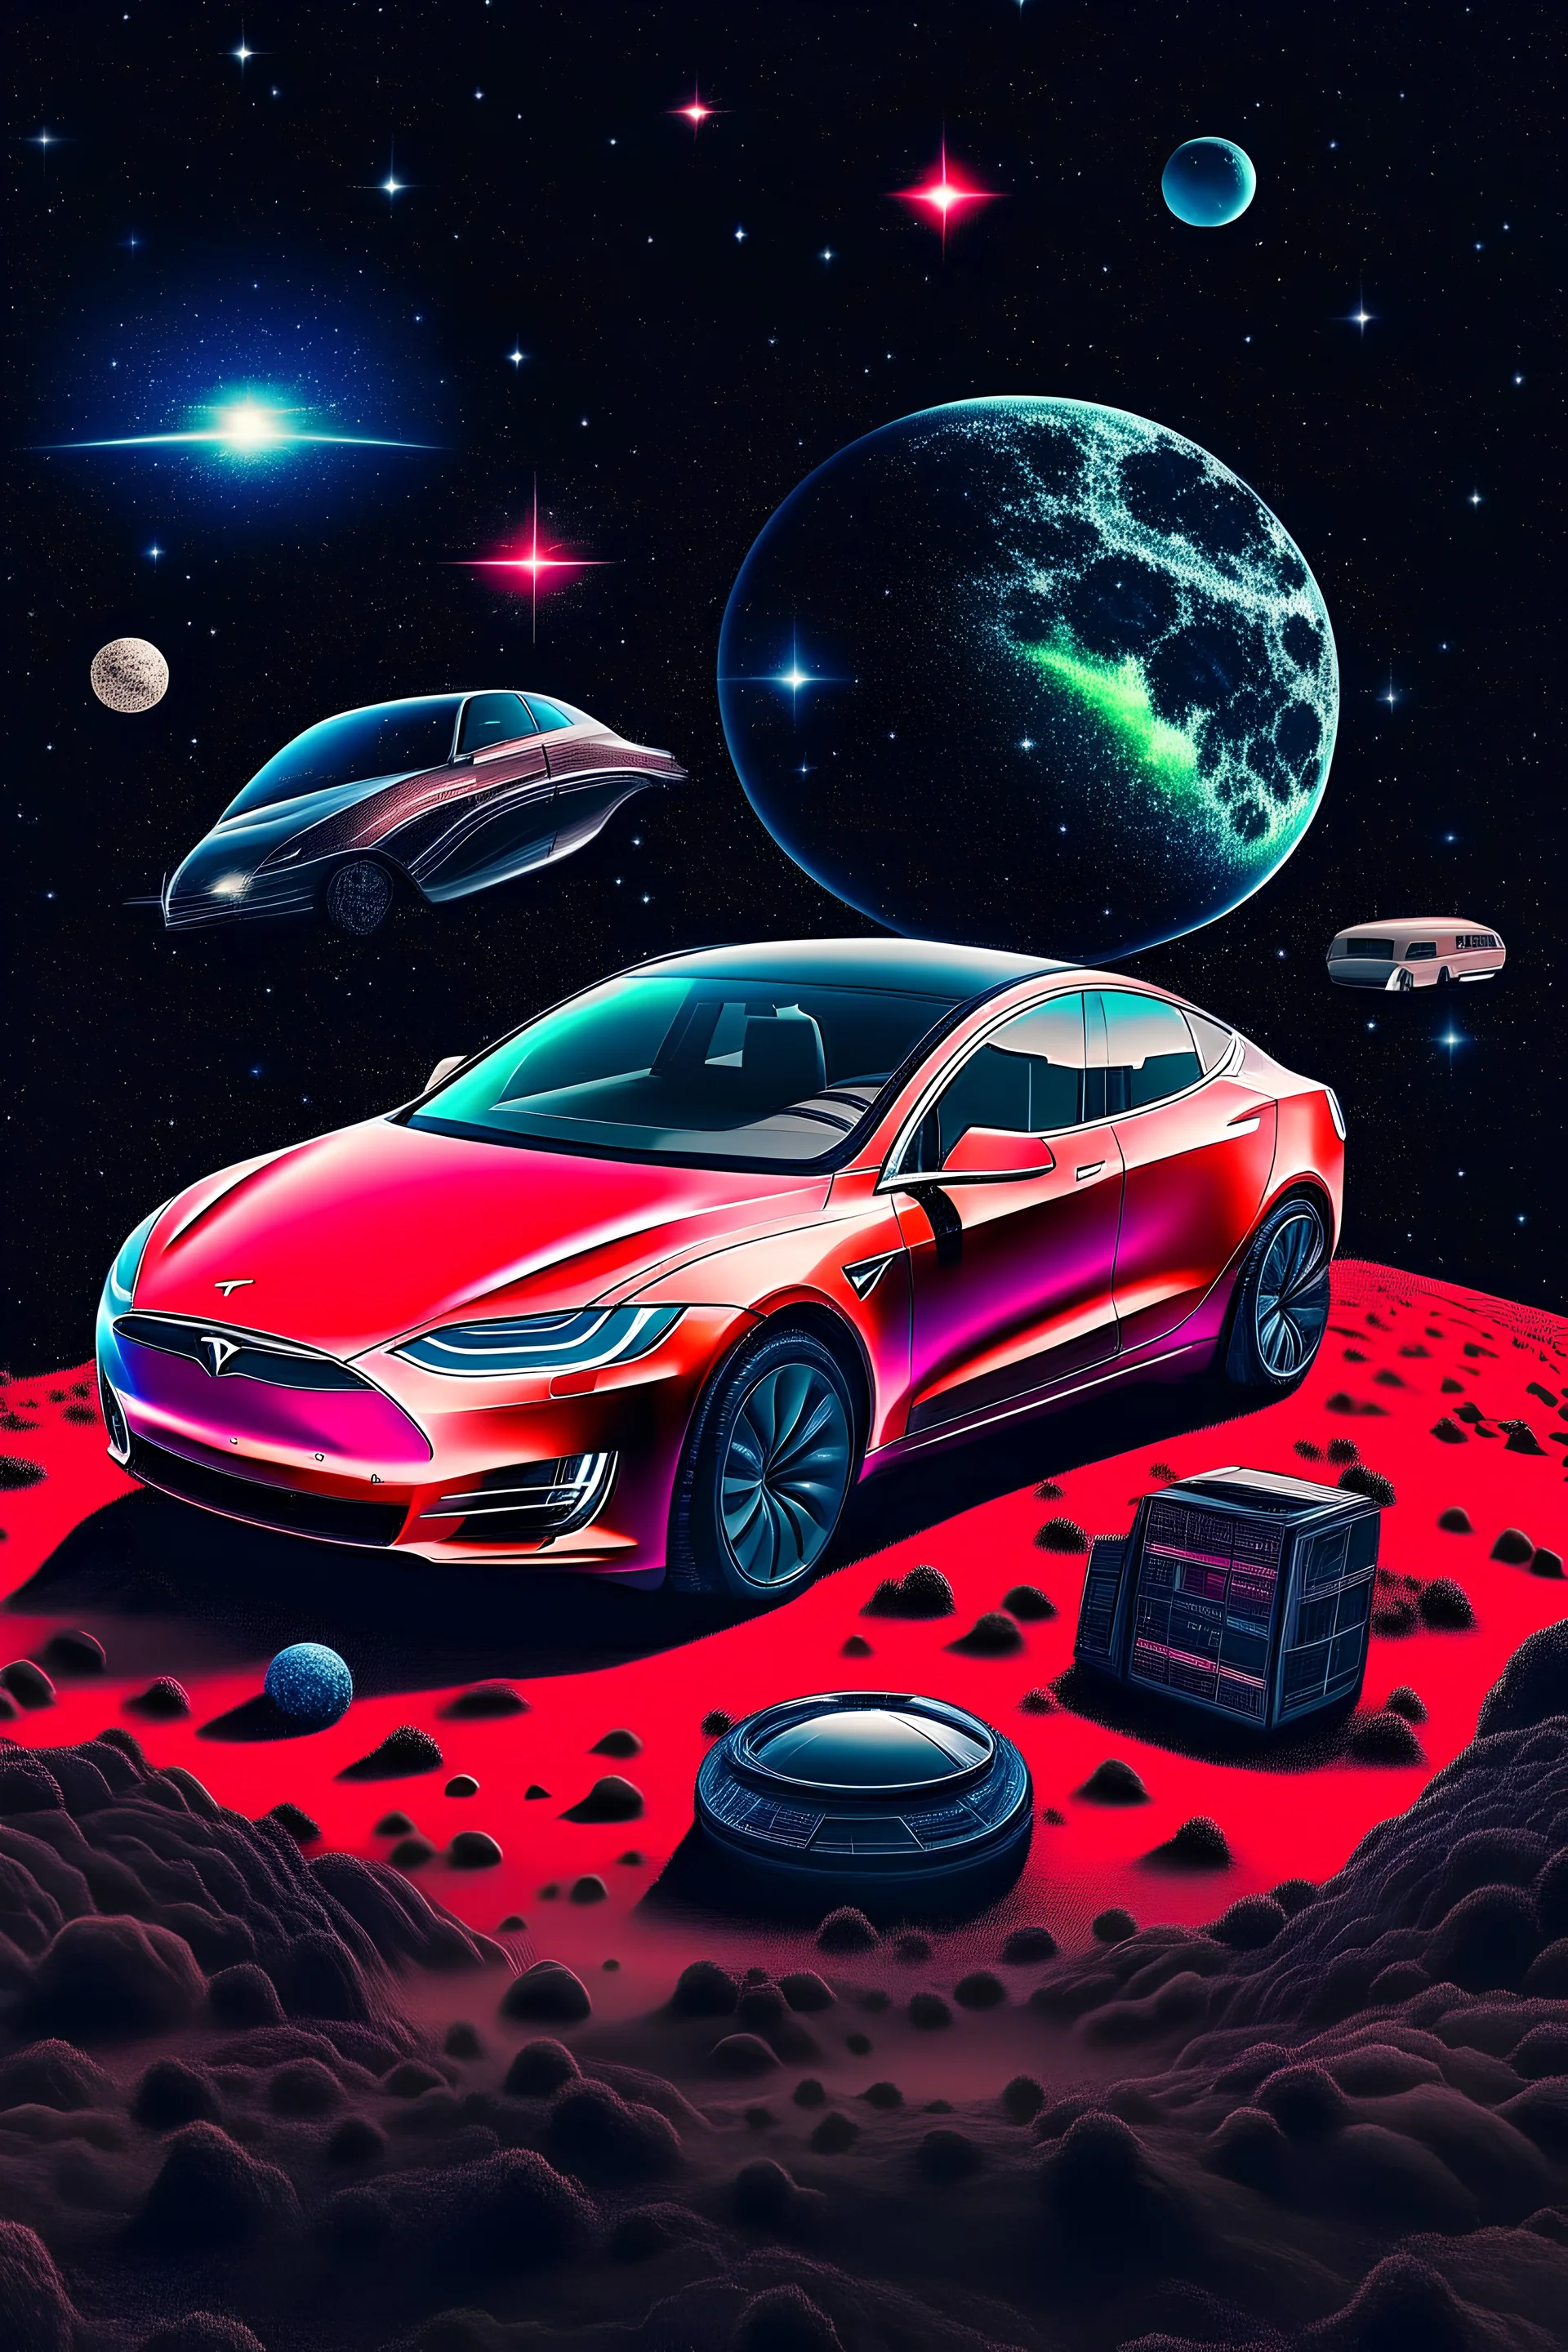 TESLA CAR FLYING THROUGH OUTER SPACE SURROUNDED BY WEIRD EVERYDAY ITEMS IN THE BACKGROUND